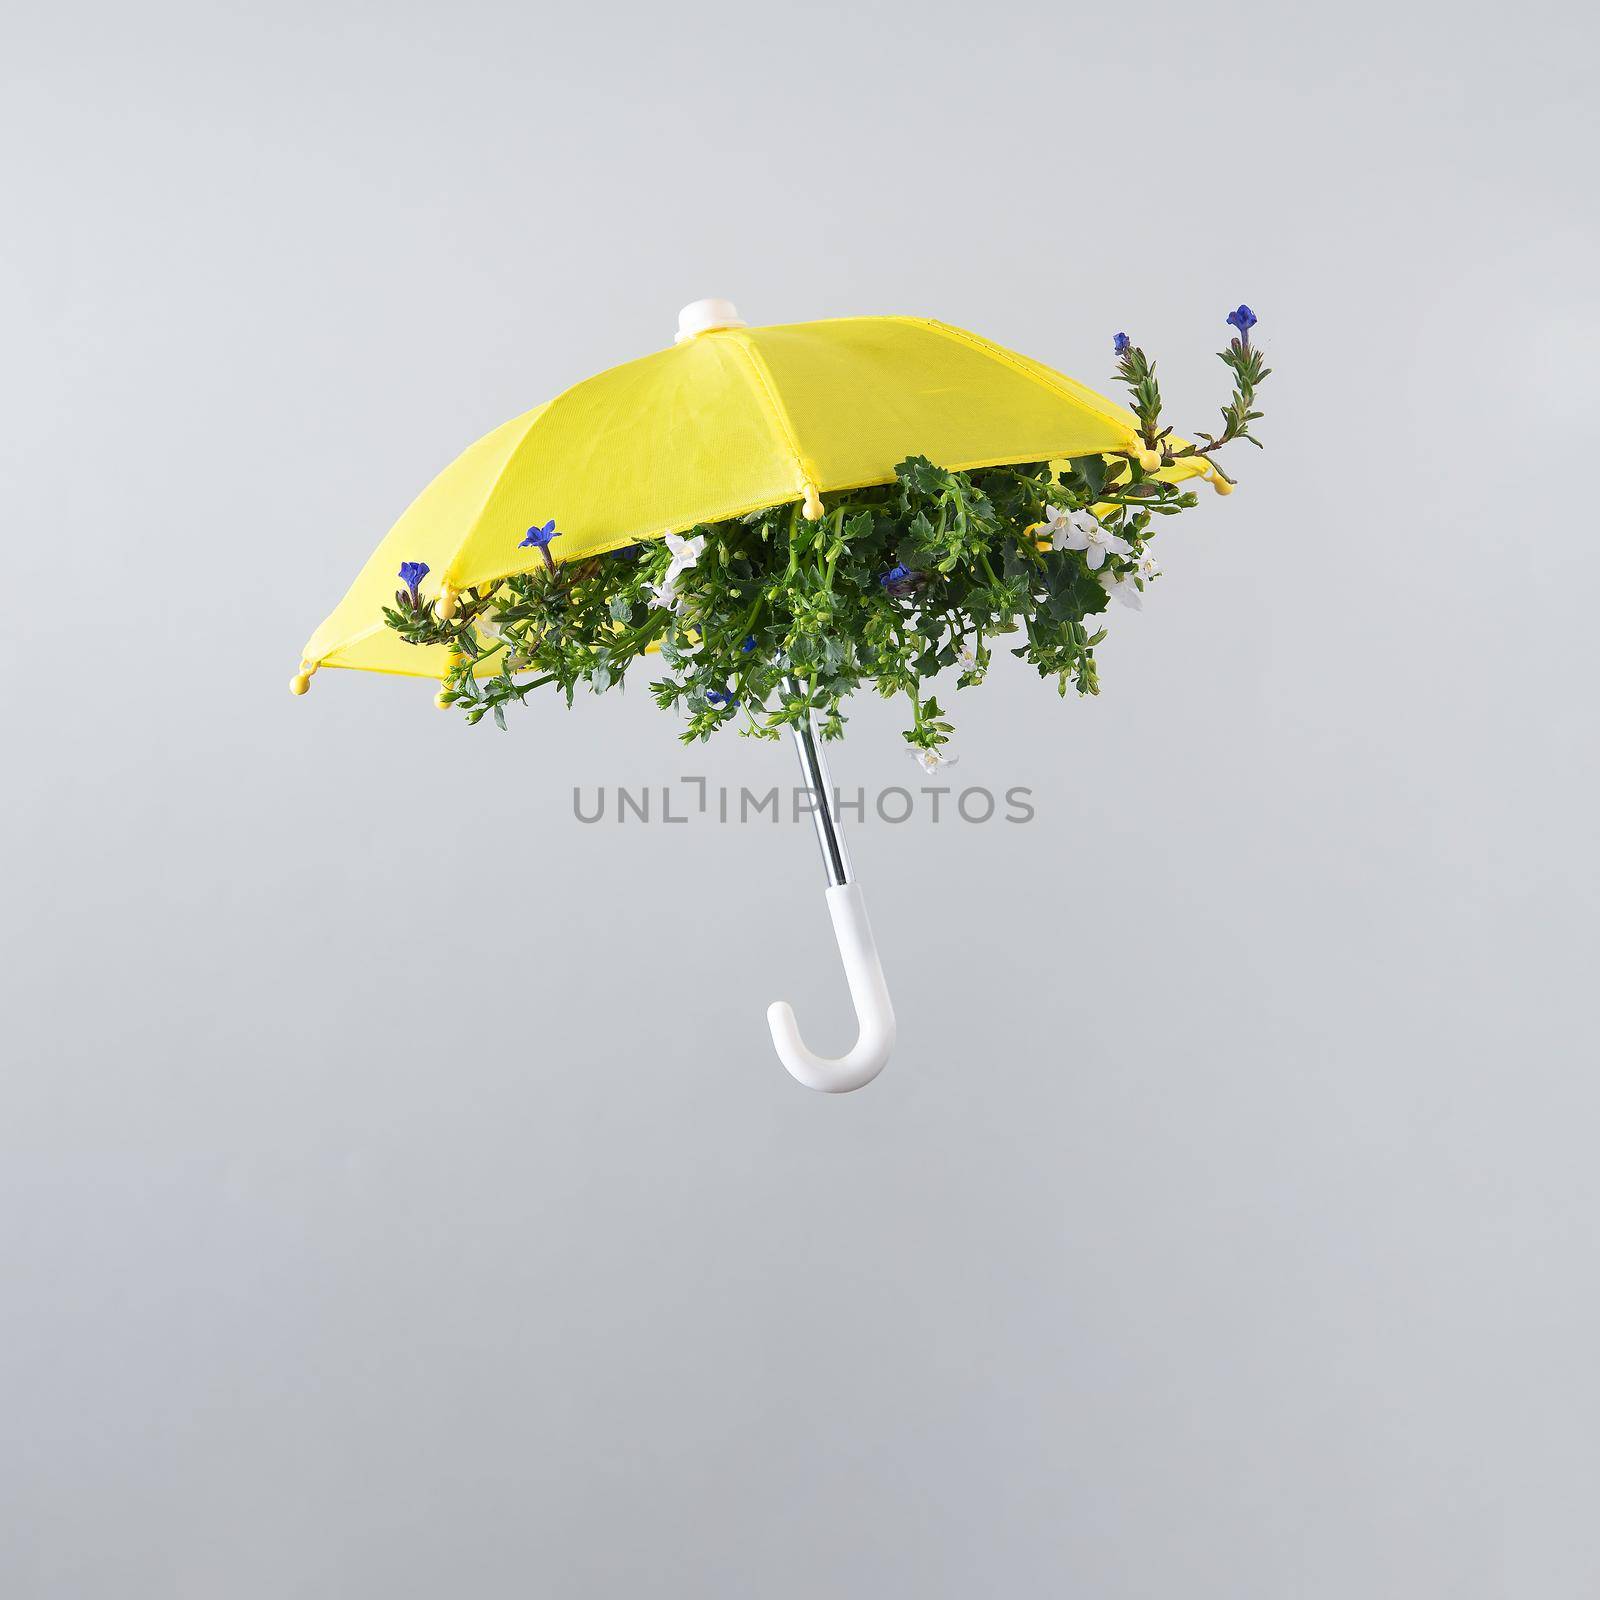 Spring flower bloom arranged inside yellow umbrella isolated on light gray background. Spring motif. Square layout with copy space.